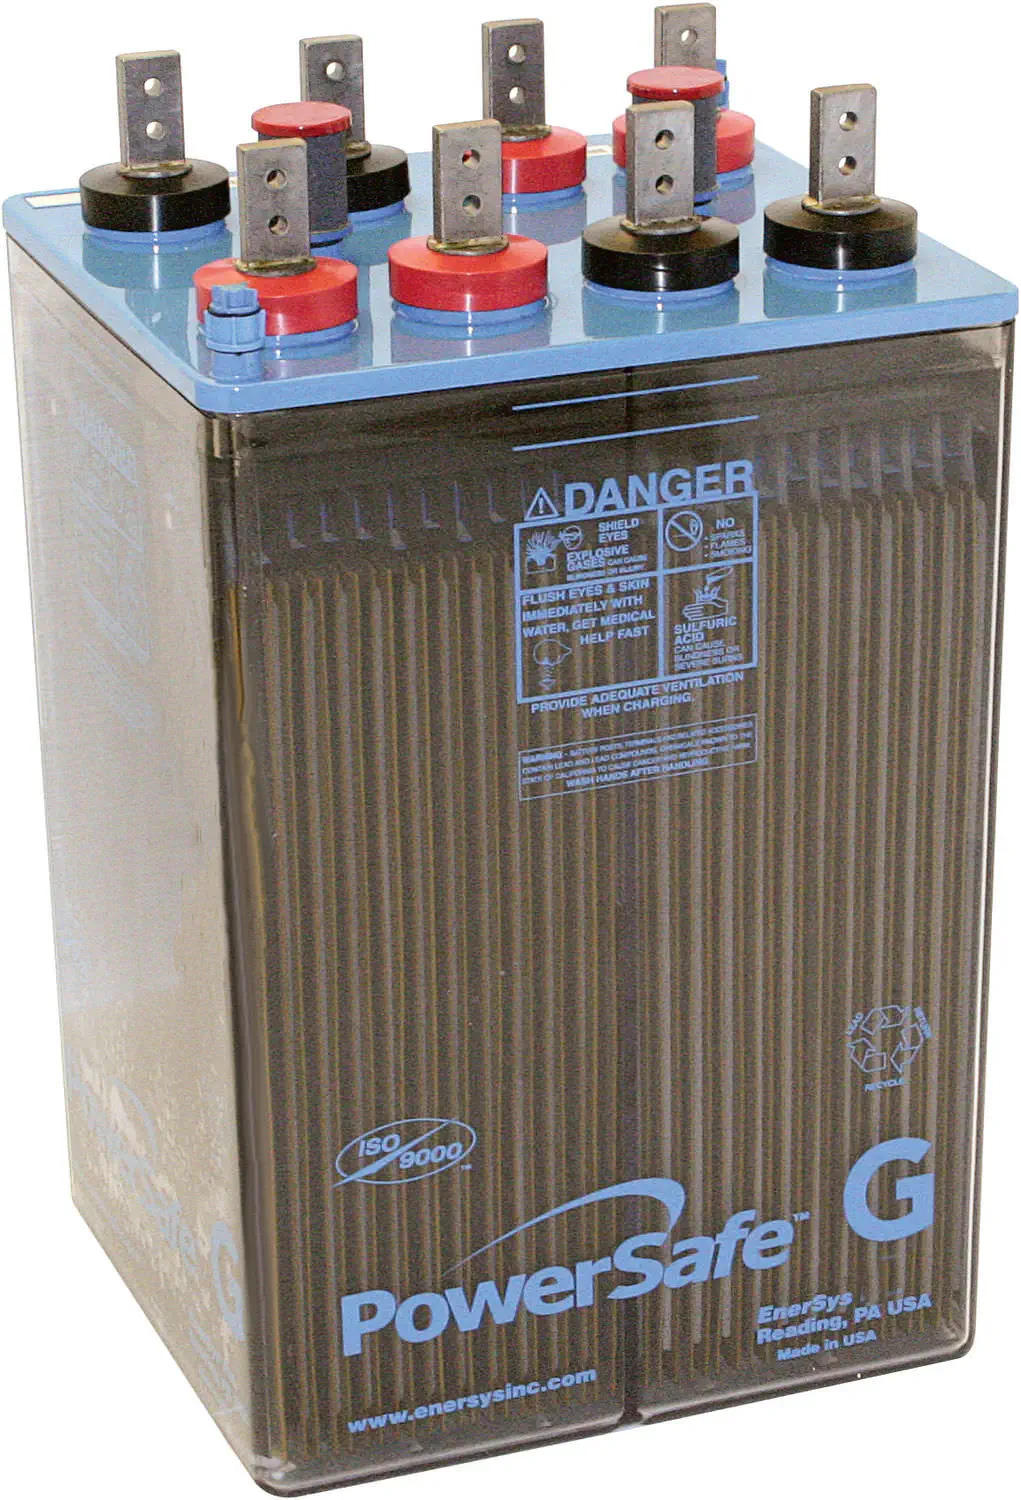 EnerSys PowerSafe GN-31